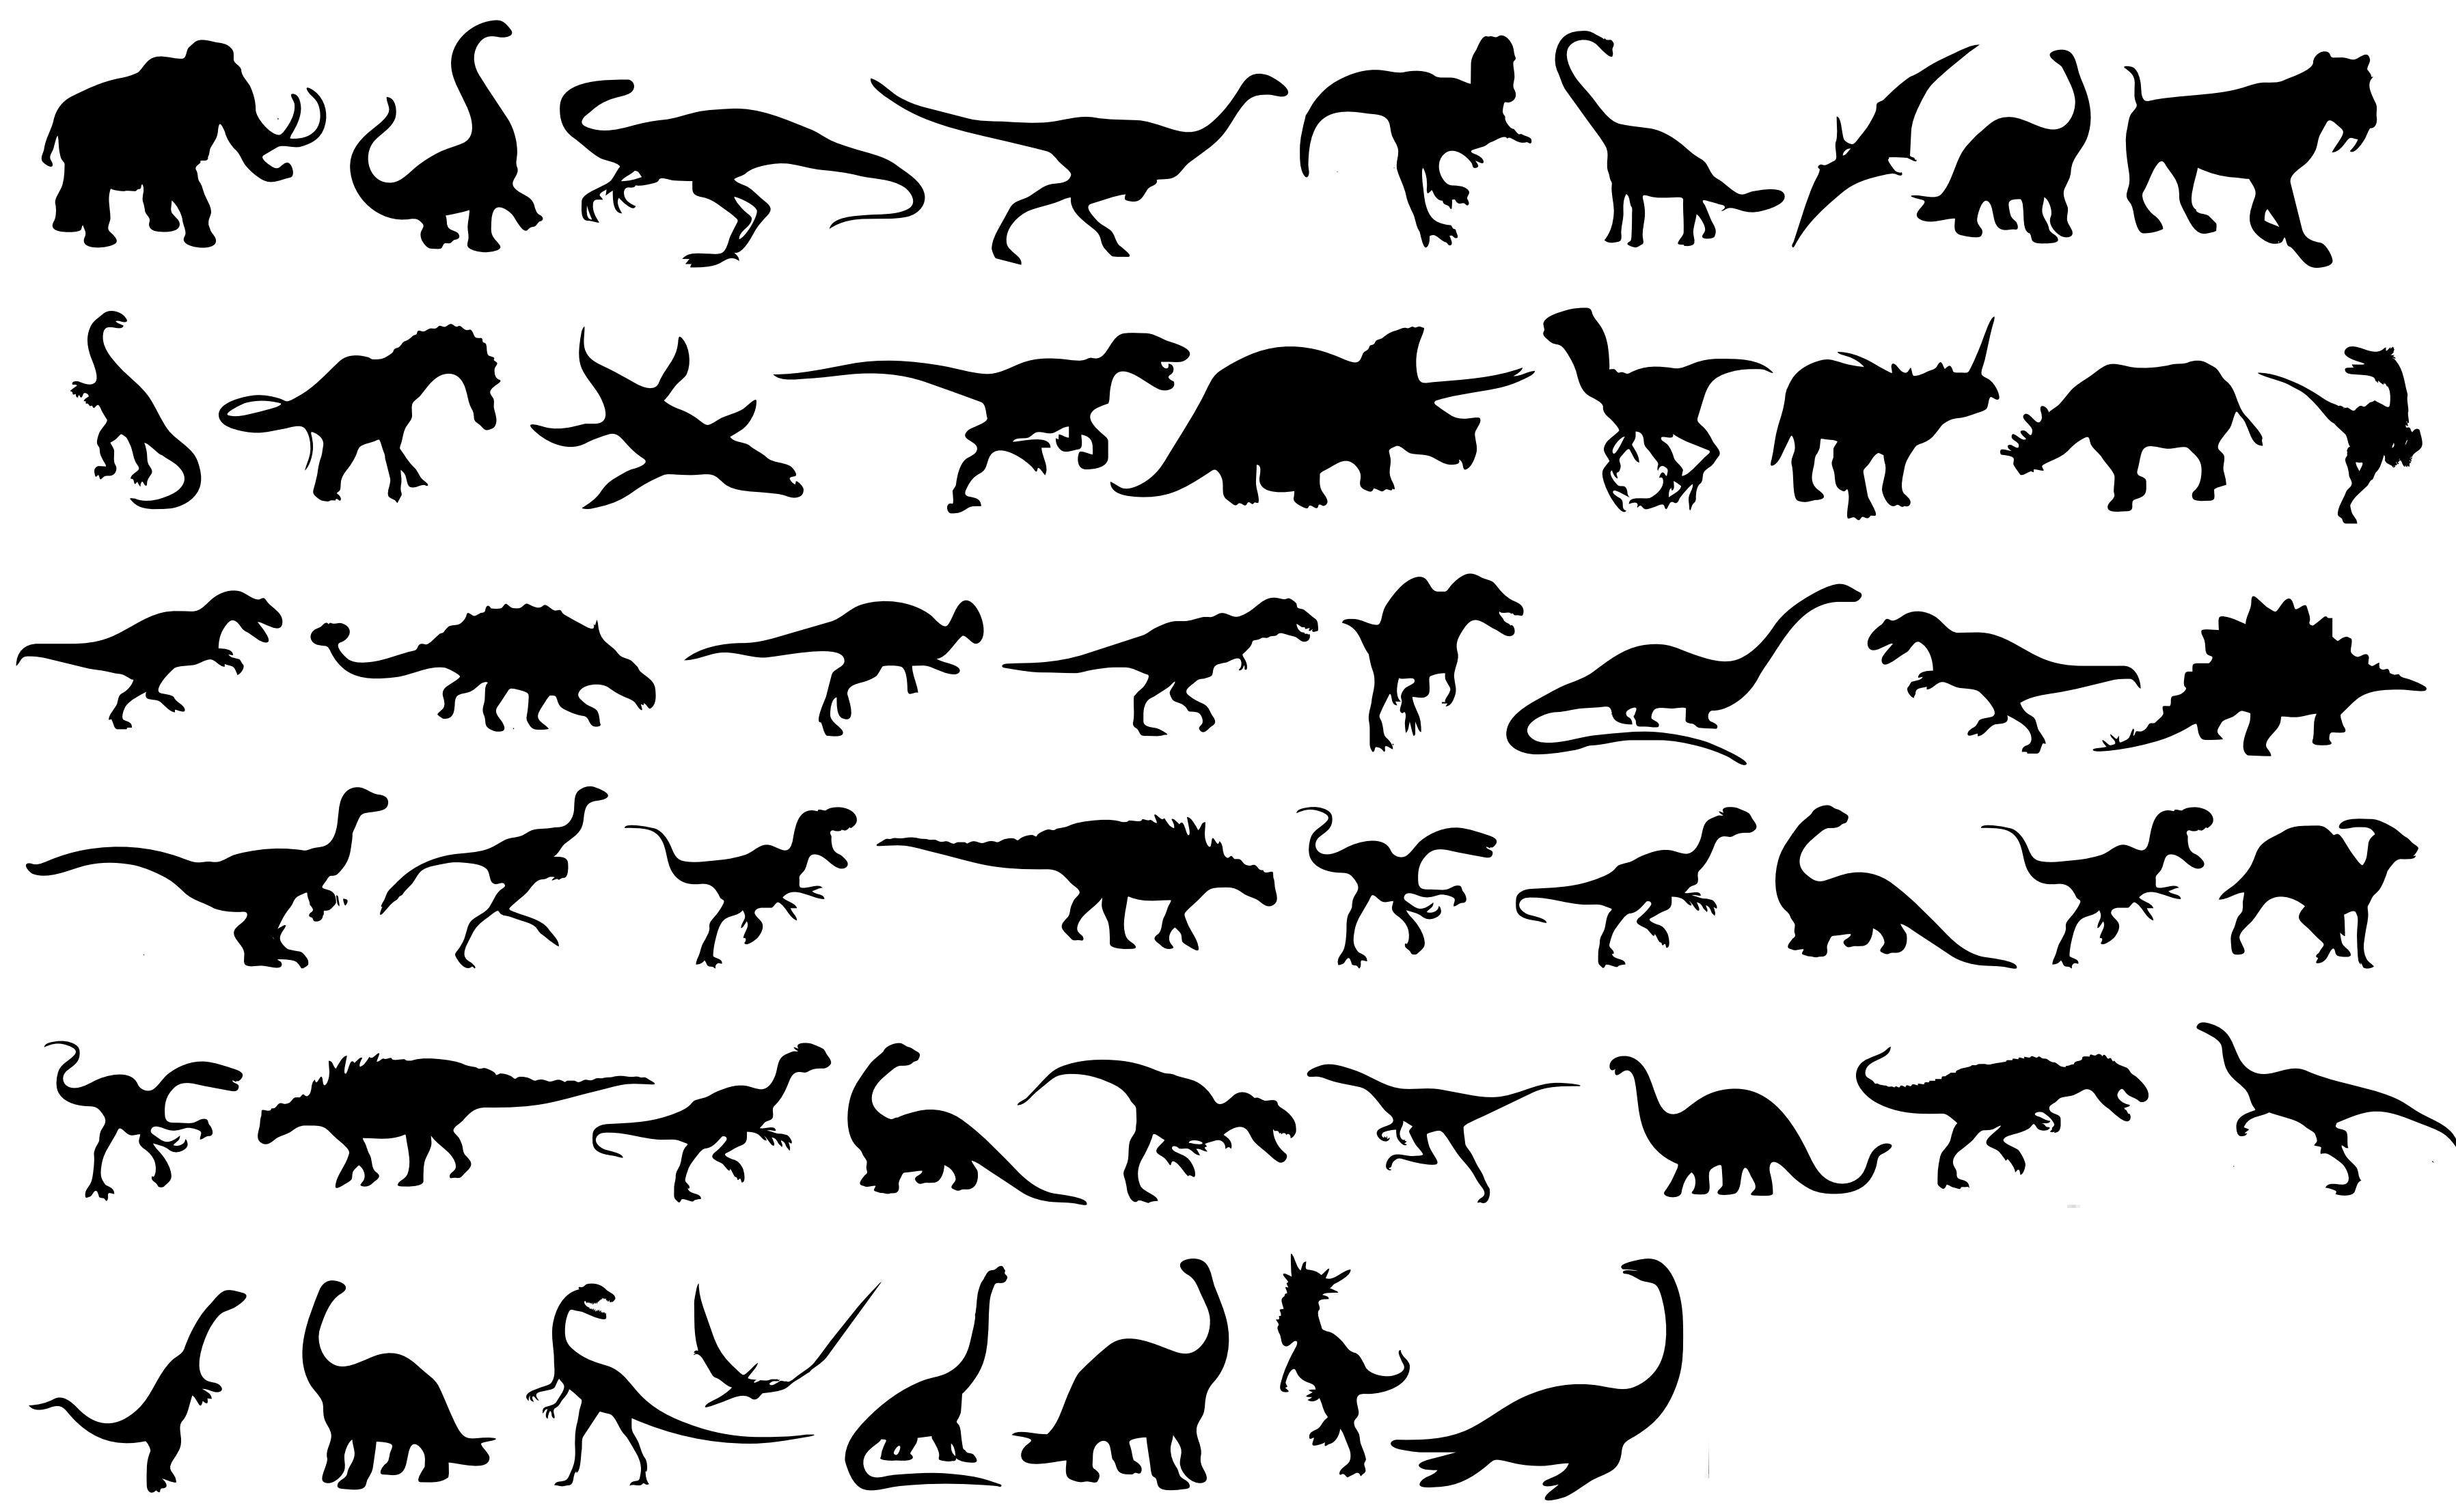 Dinosaurs Silhouettes png